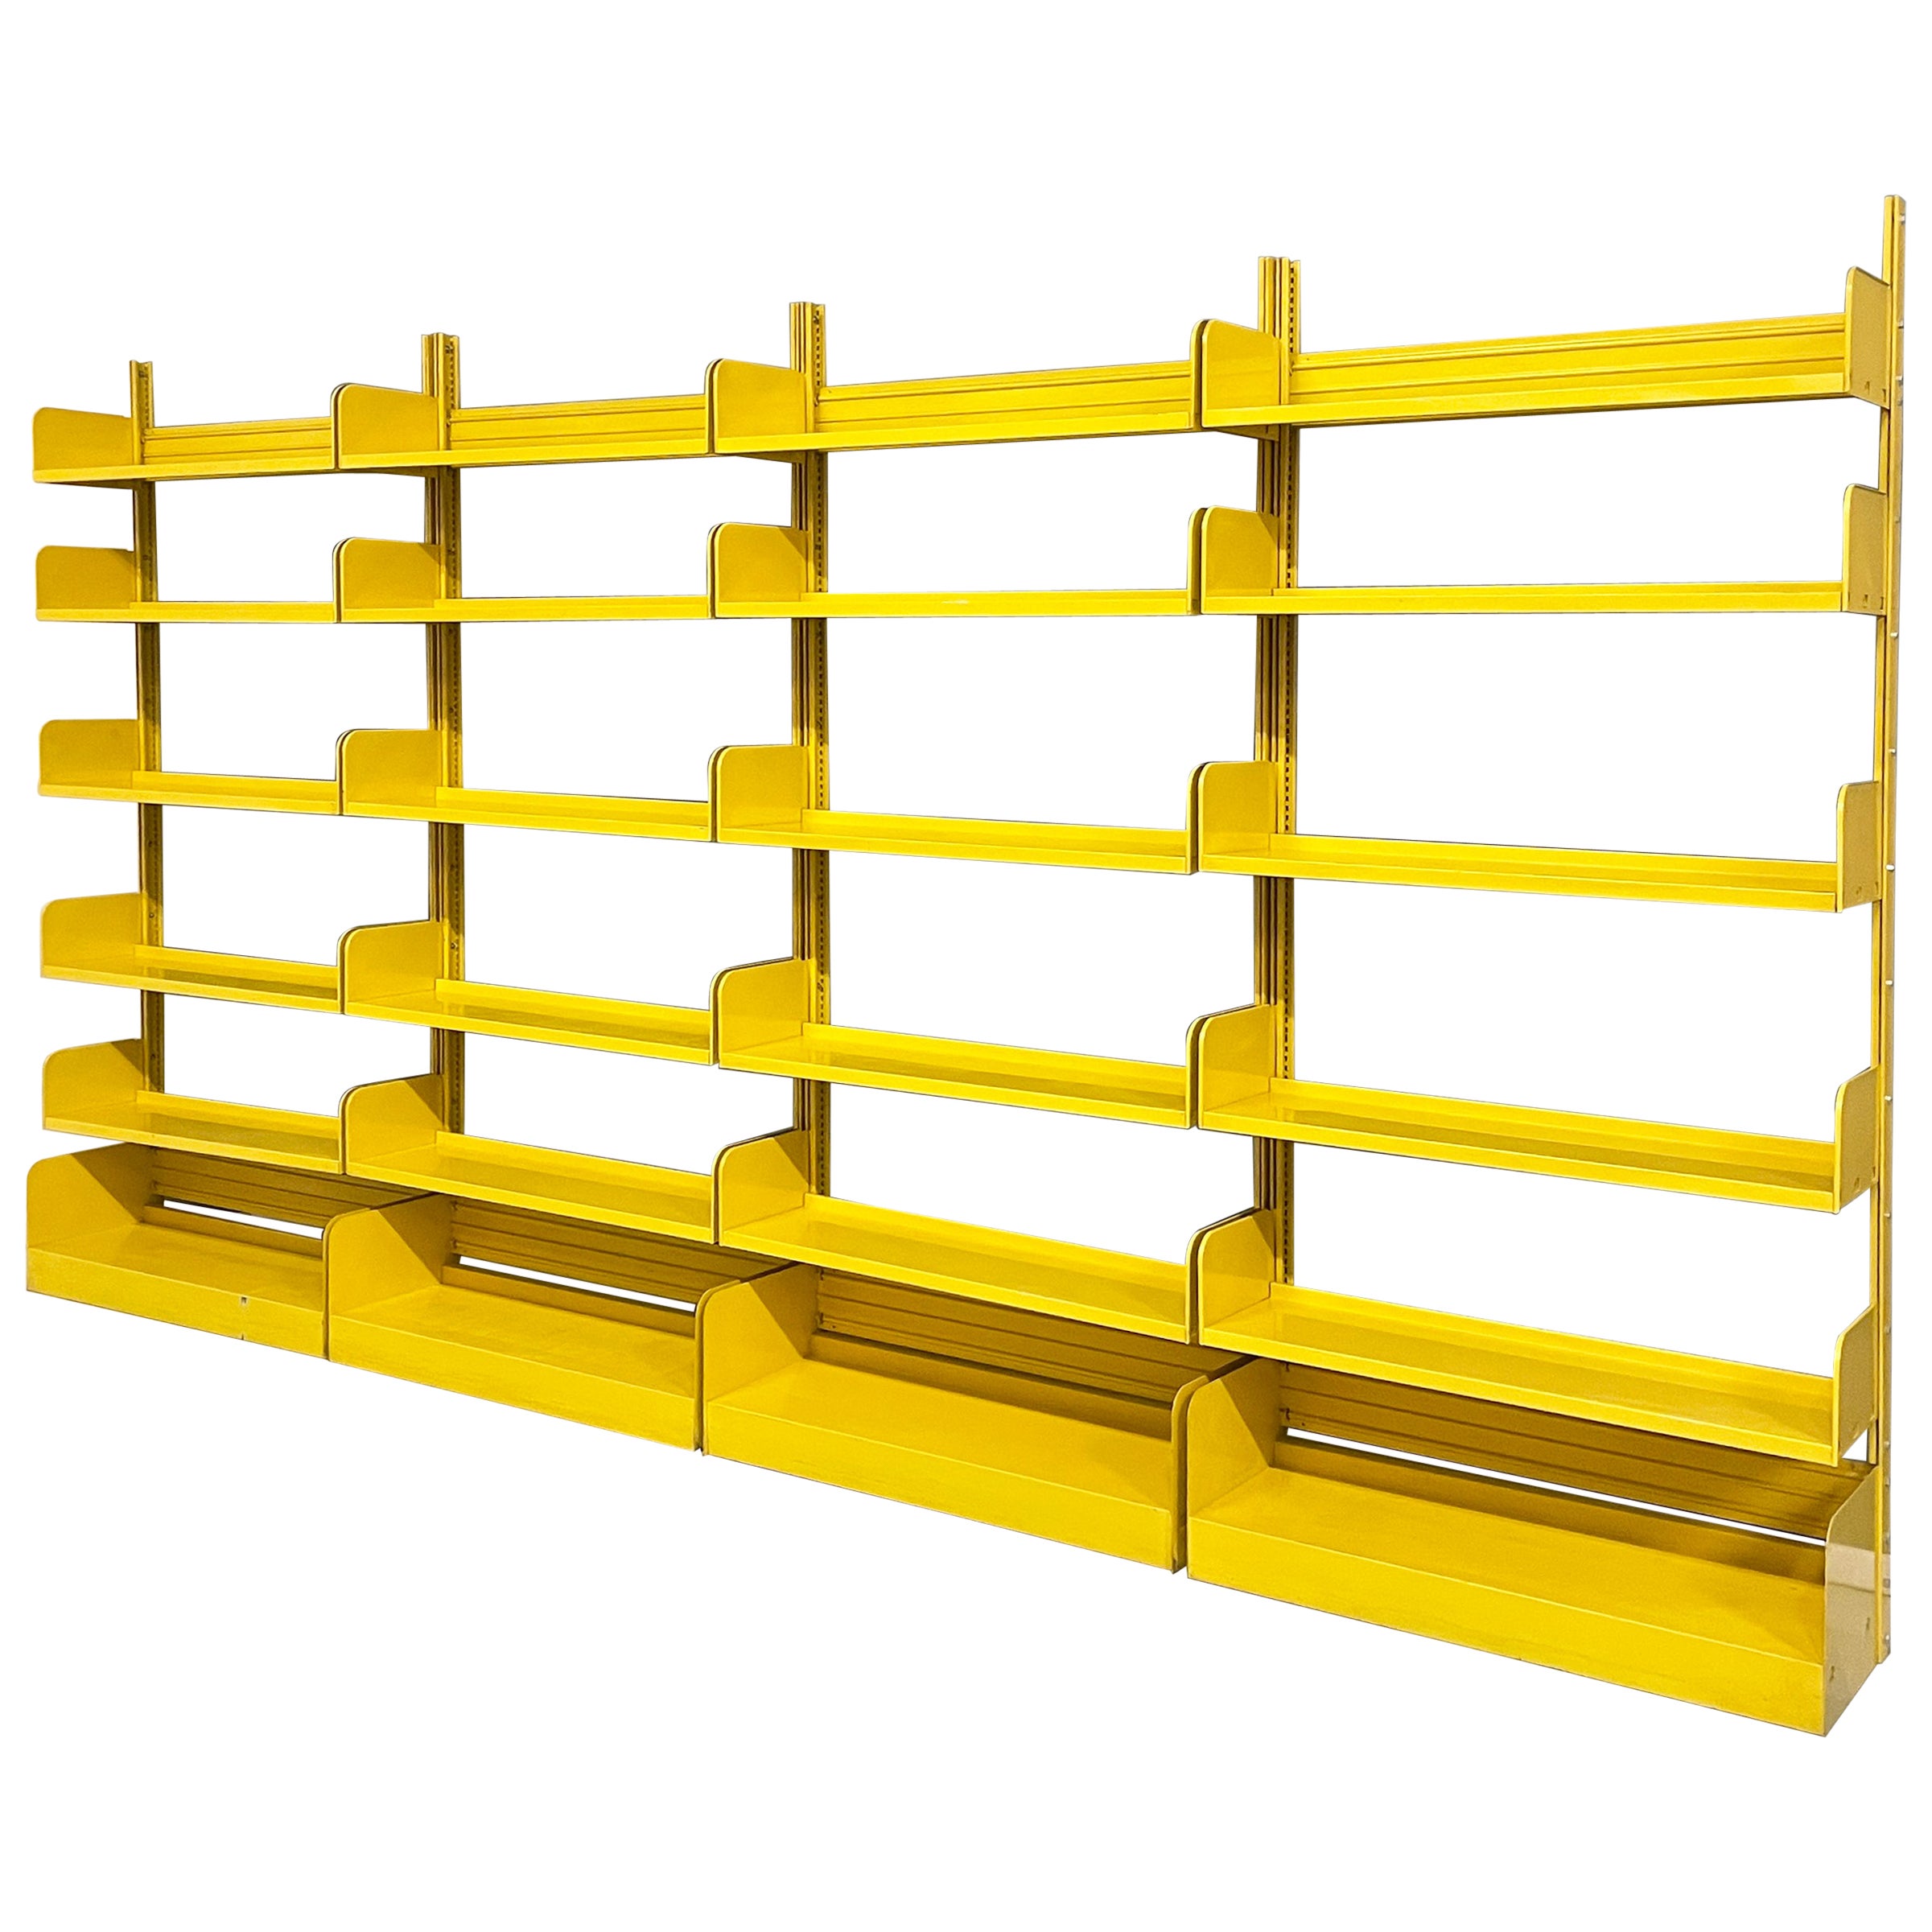 Italian mid-century Yellow metal modular bookcase Congresso by Lips Vago, 1960s For Sale